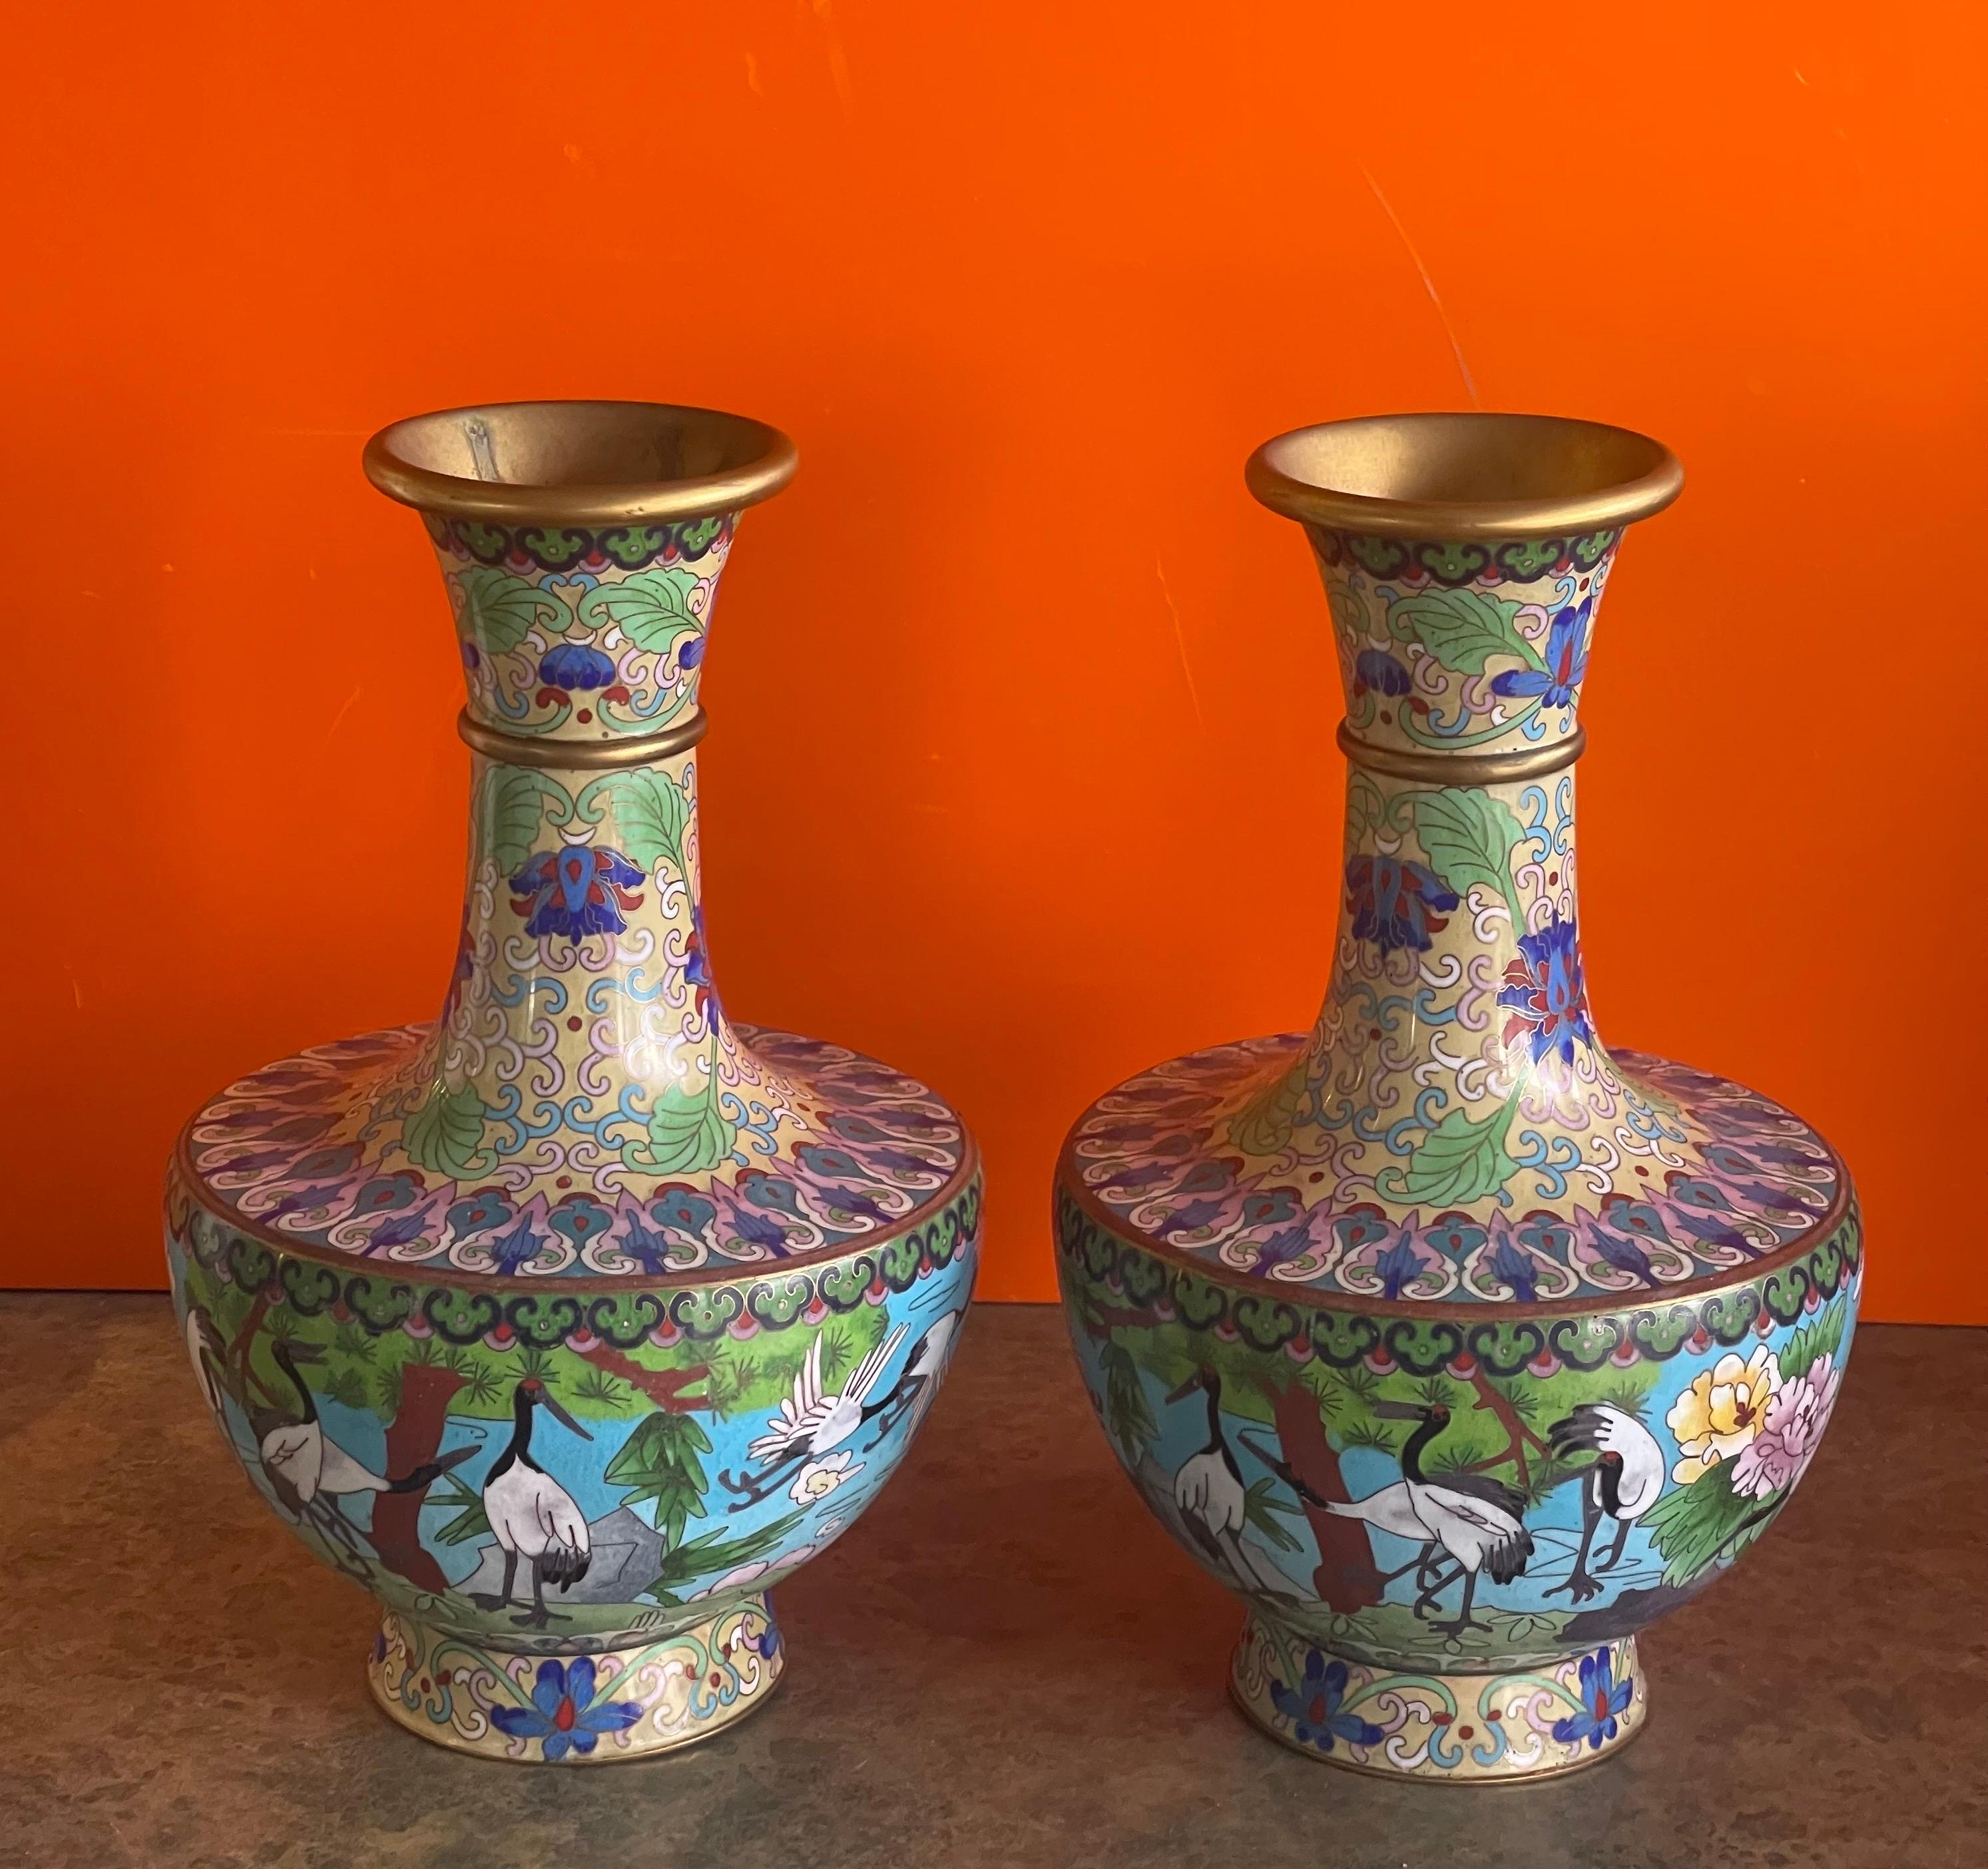 Mirrored Pair of Chinese Cloisonne Vases with Crane Motif 4